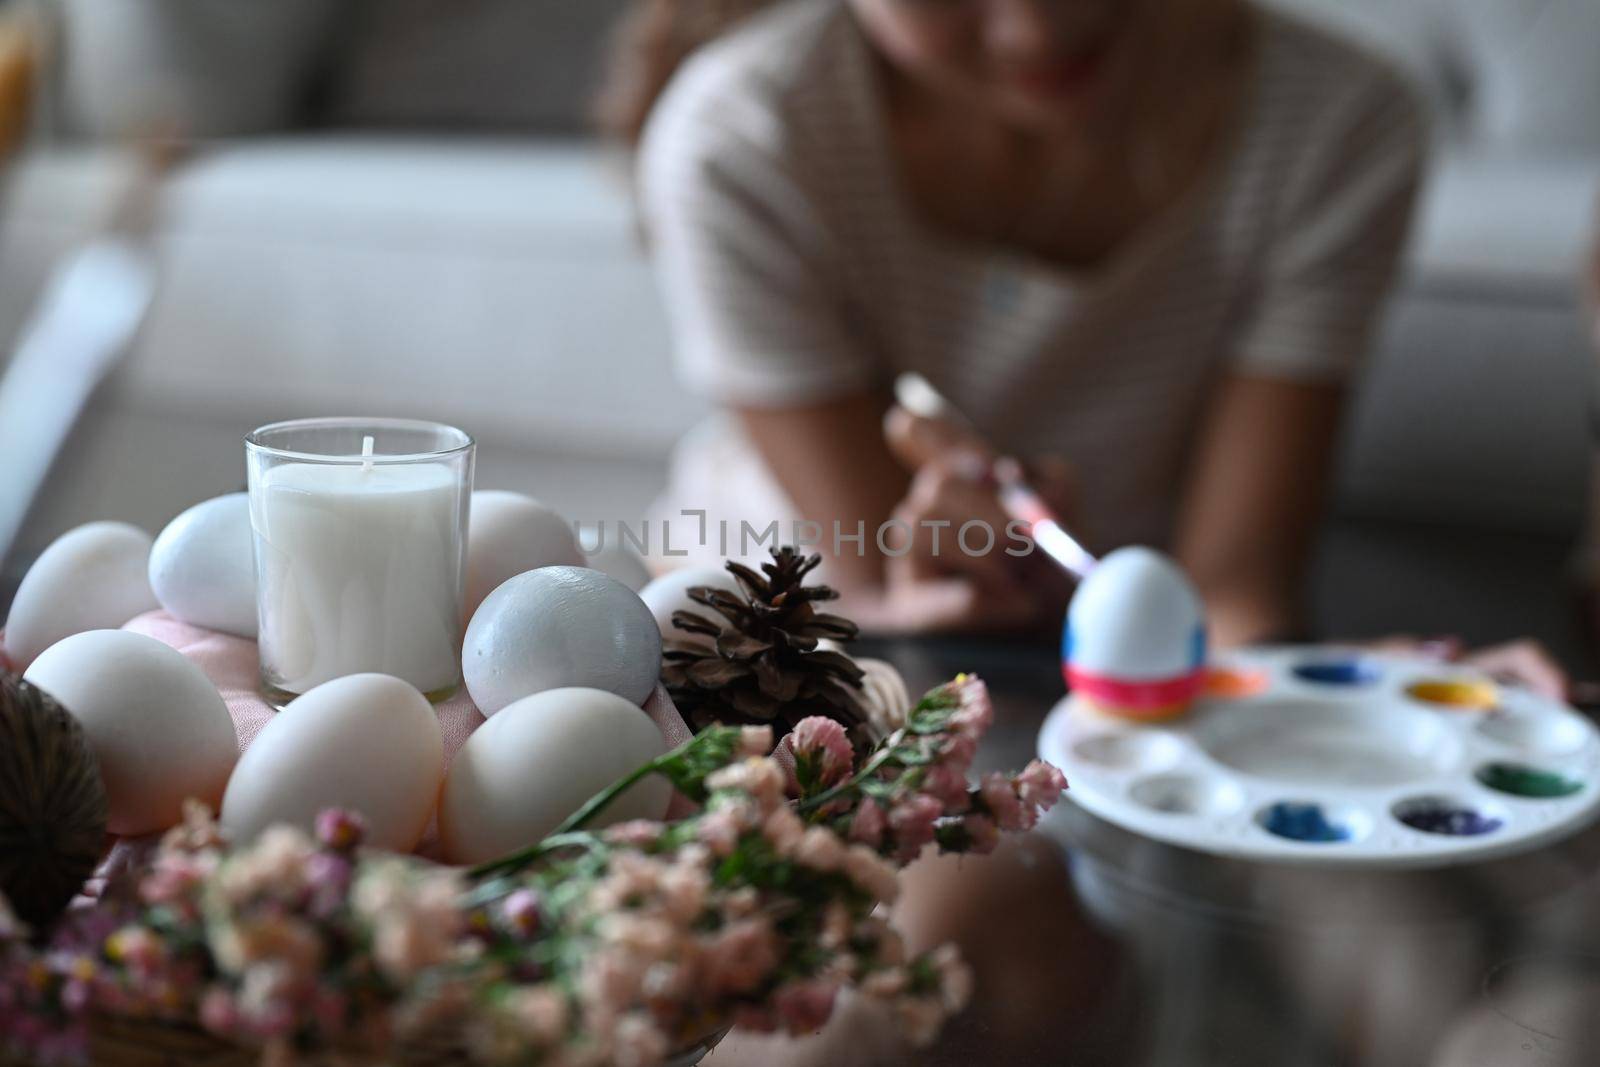 Close up view wicker basket full of eggs, candle and flowers on table with young woman painting Easter egg in background.